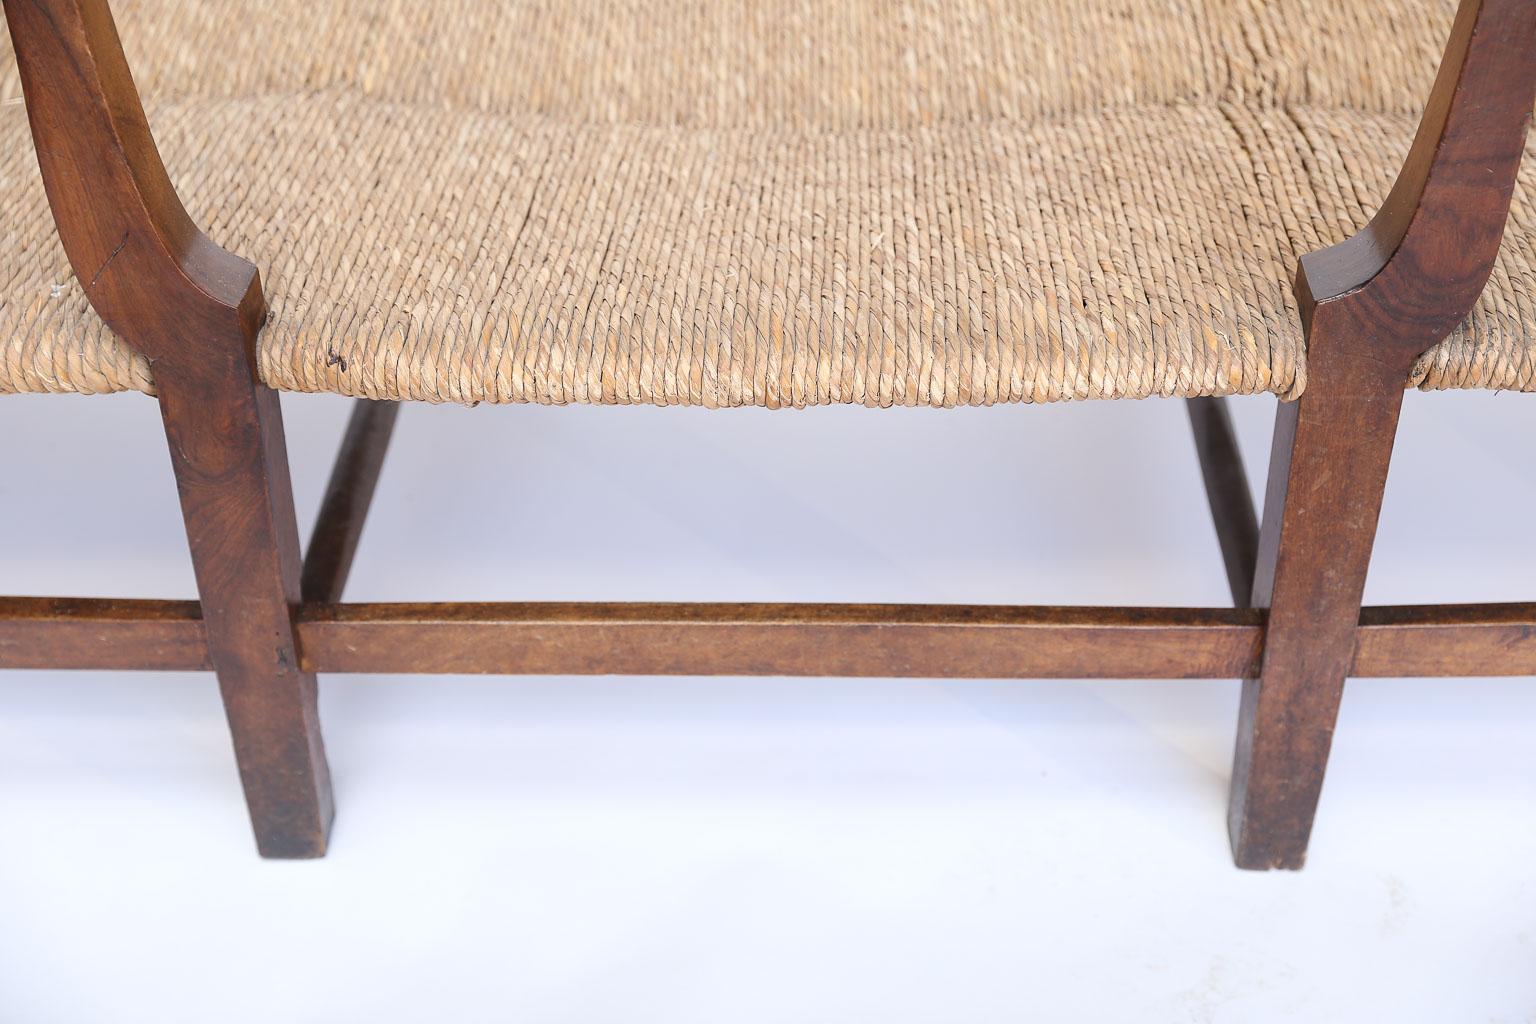 19th Century French Antique Rush Seat Bench or Day Bed